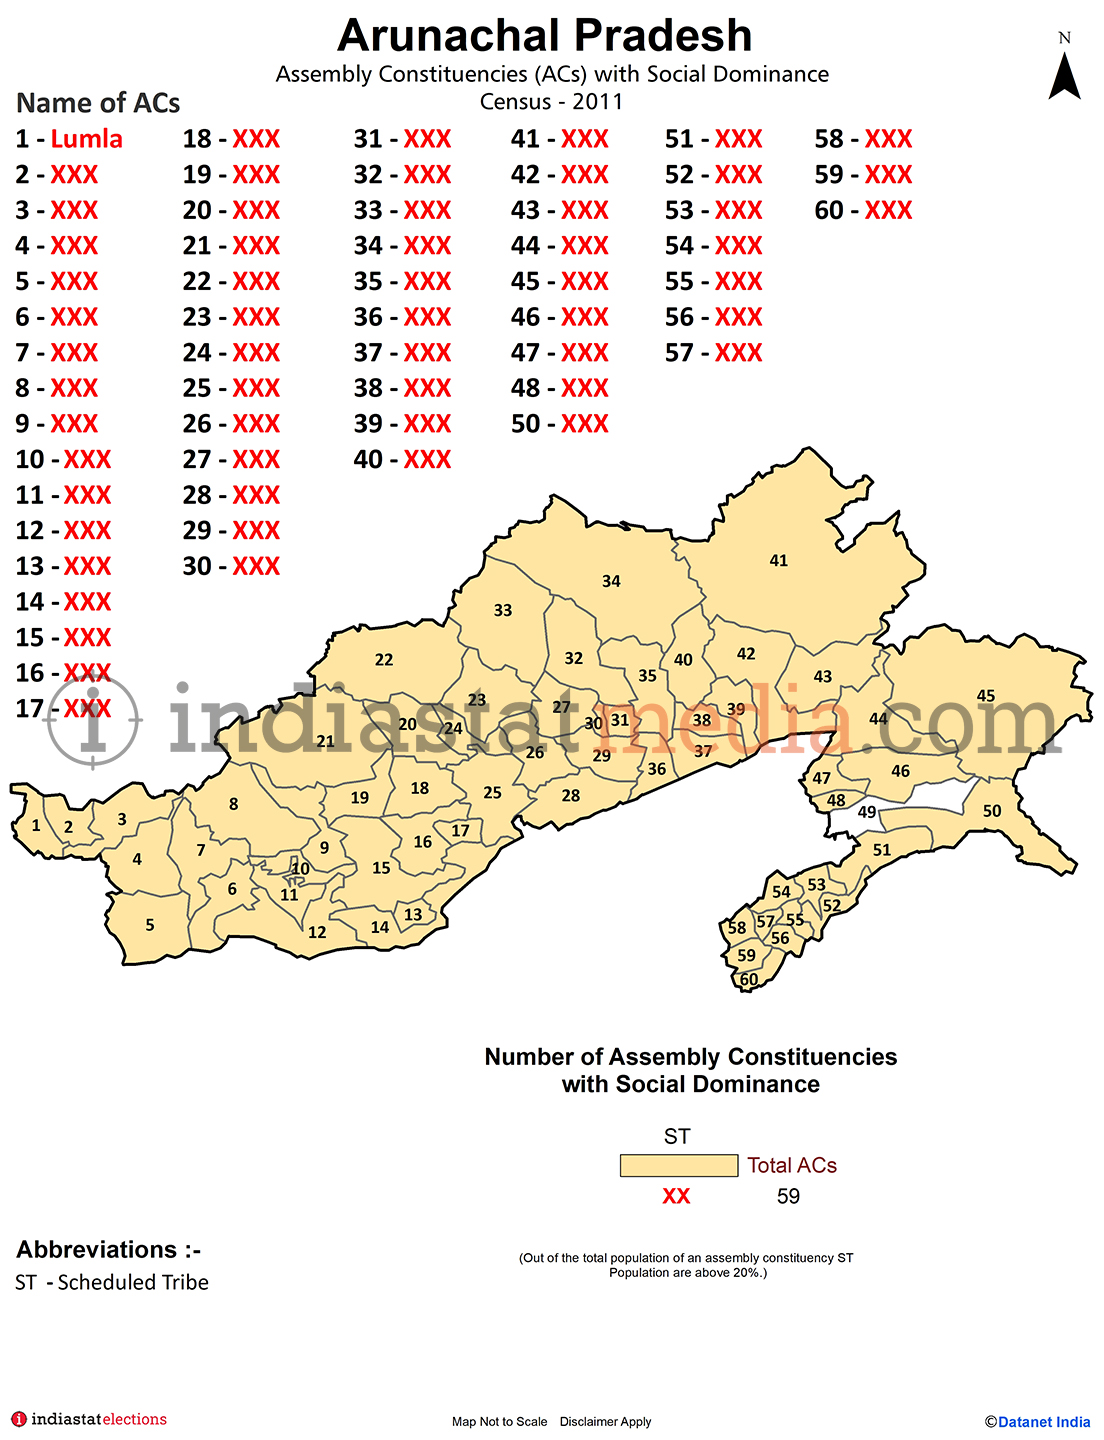 Assembly Constituencies with Social Dominance in Arunachal Pradesh - Census 2011